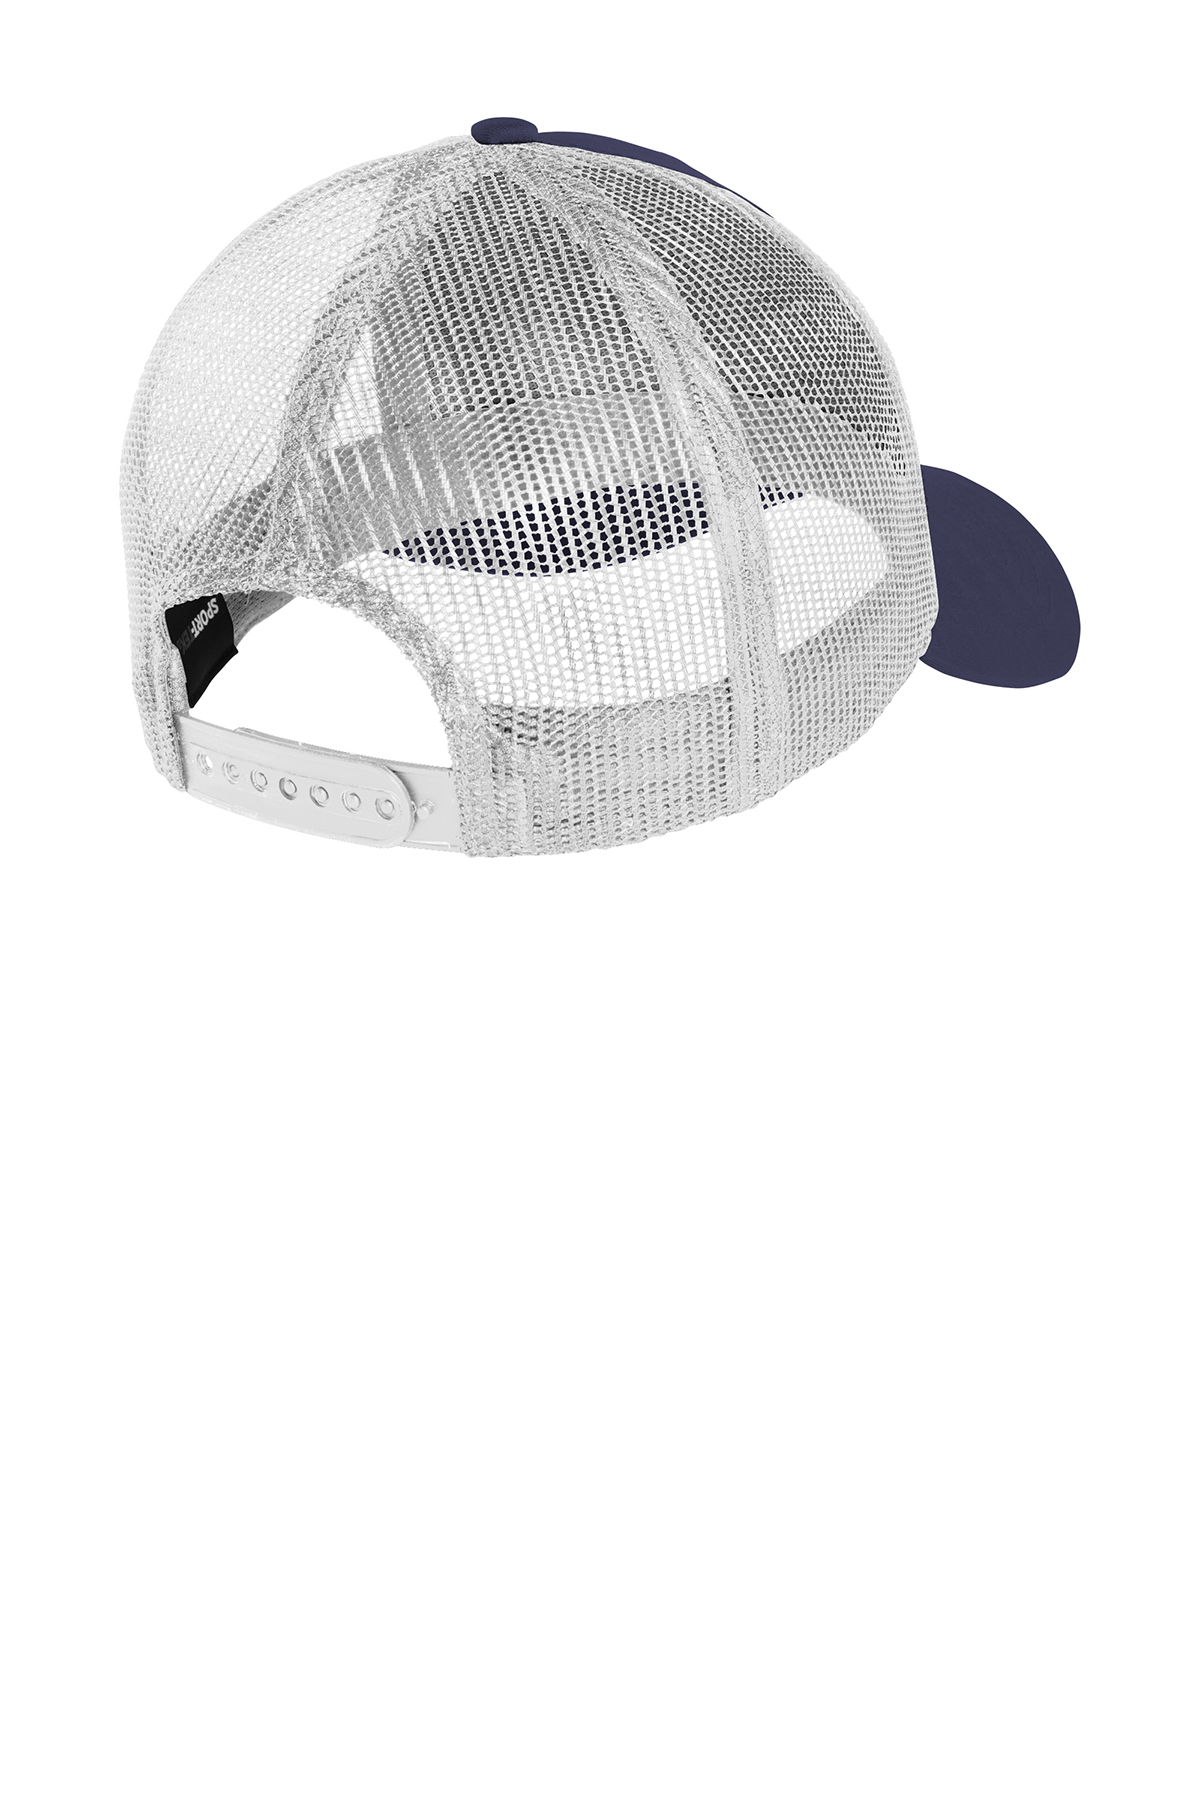 Sport-Tek PosiCharge Competitor Mesh Back Cap | Product | Company Casuals